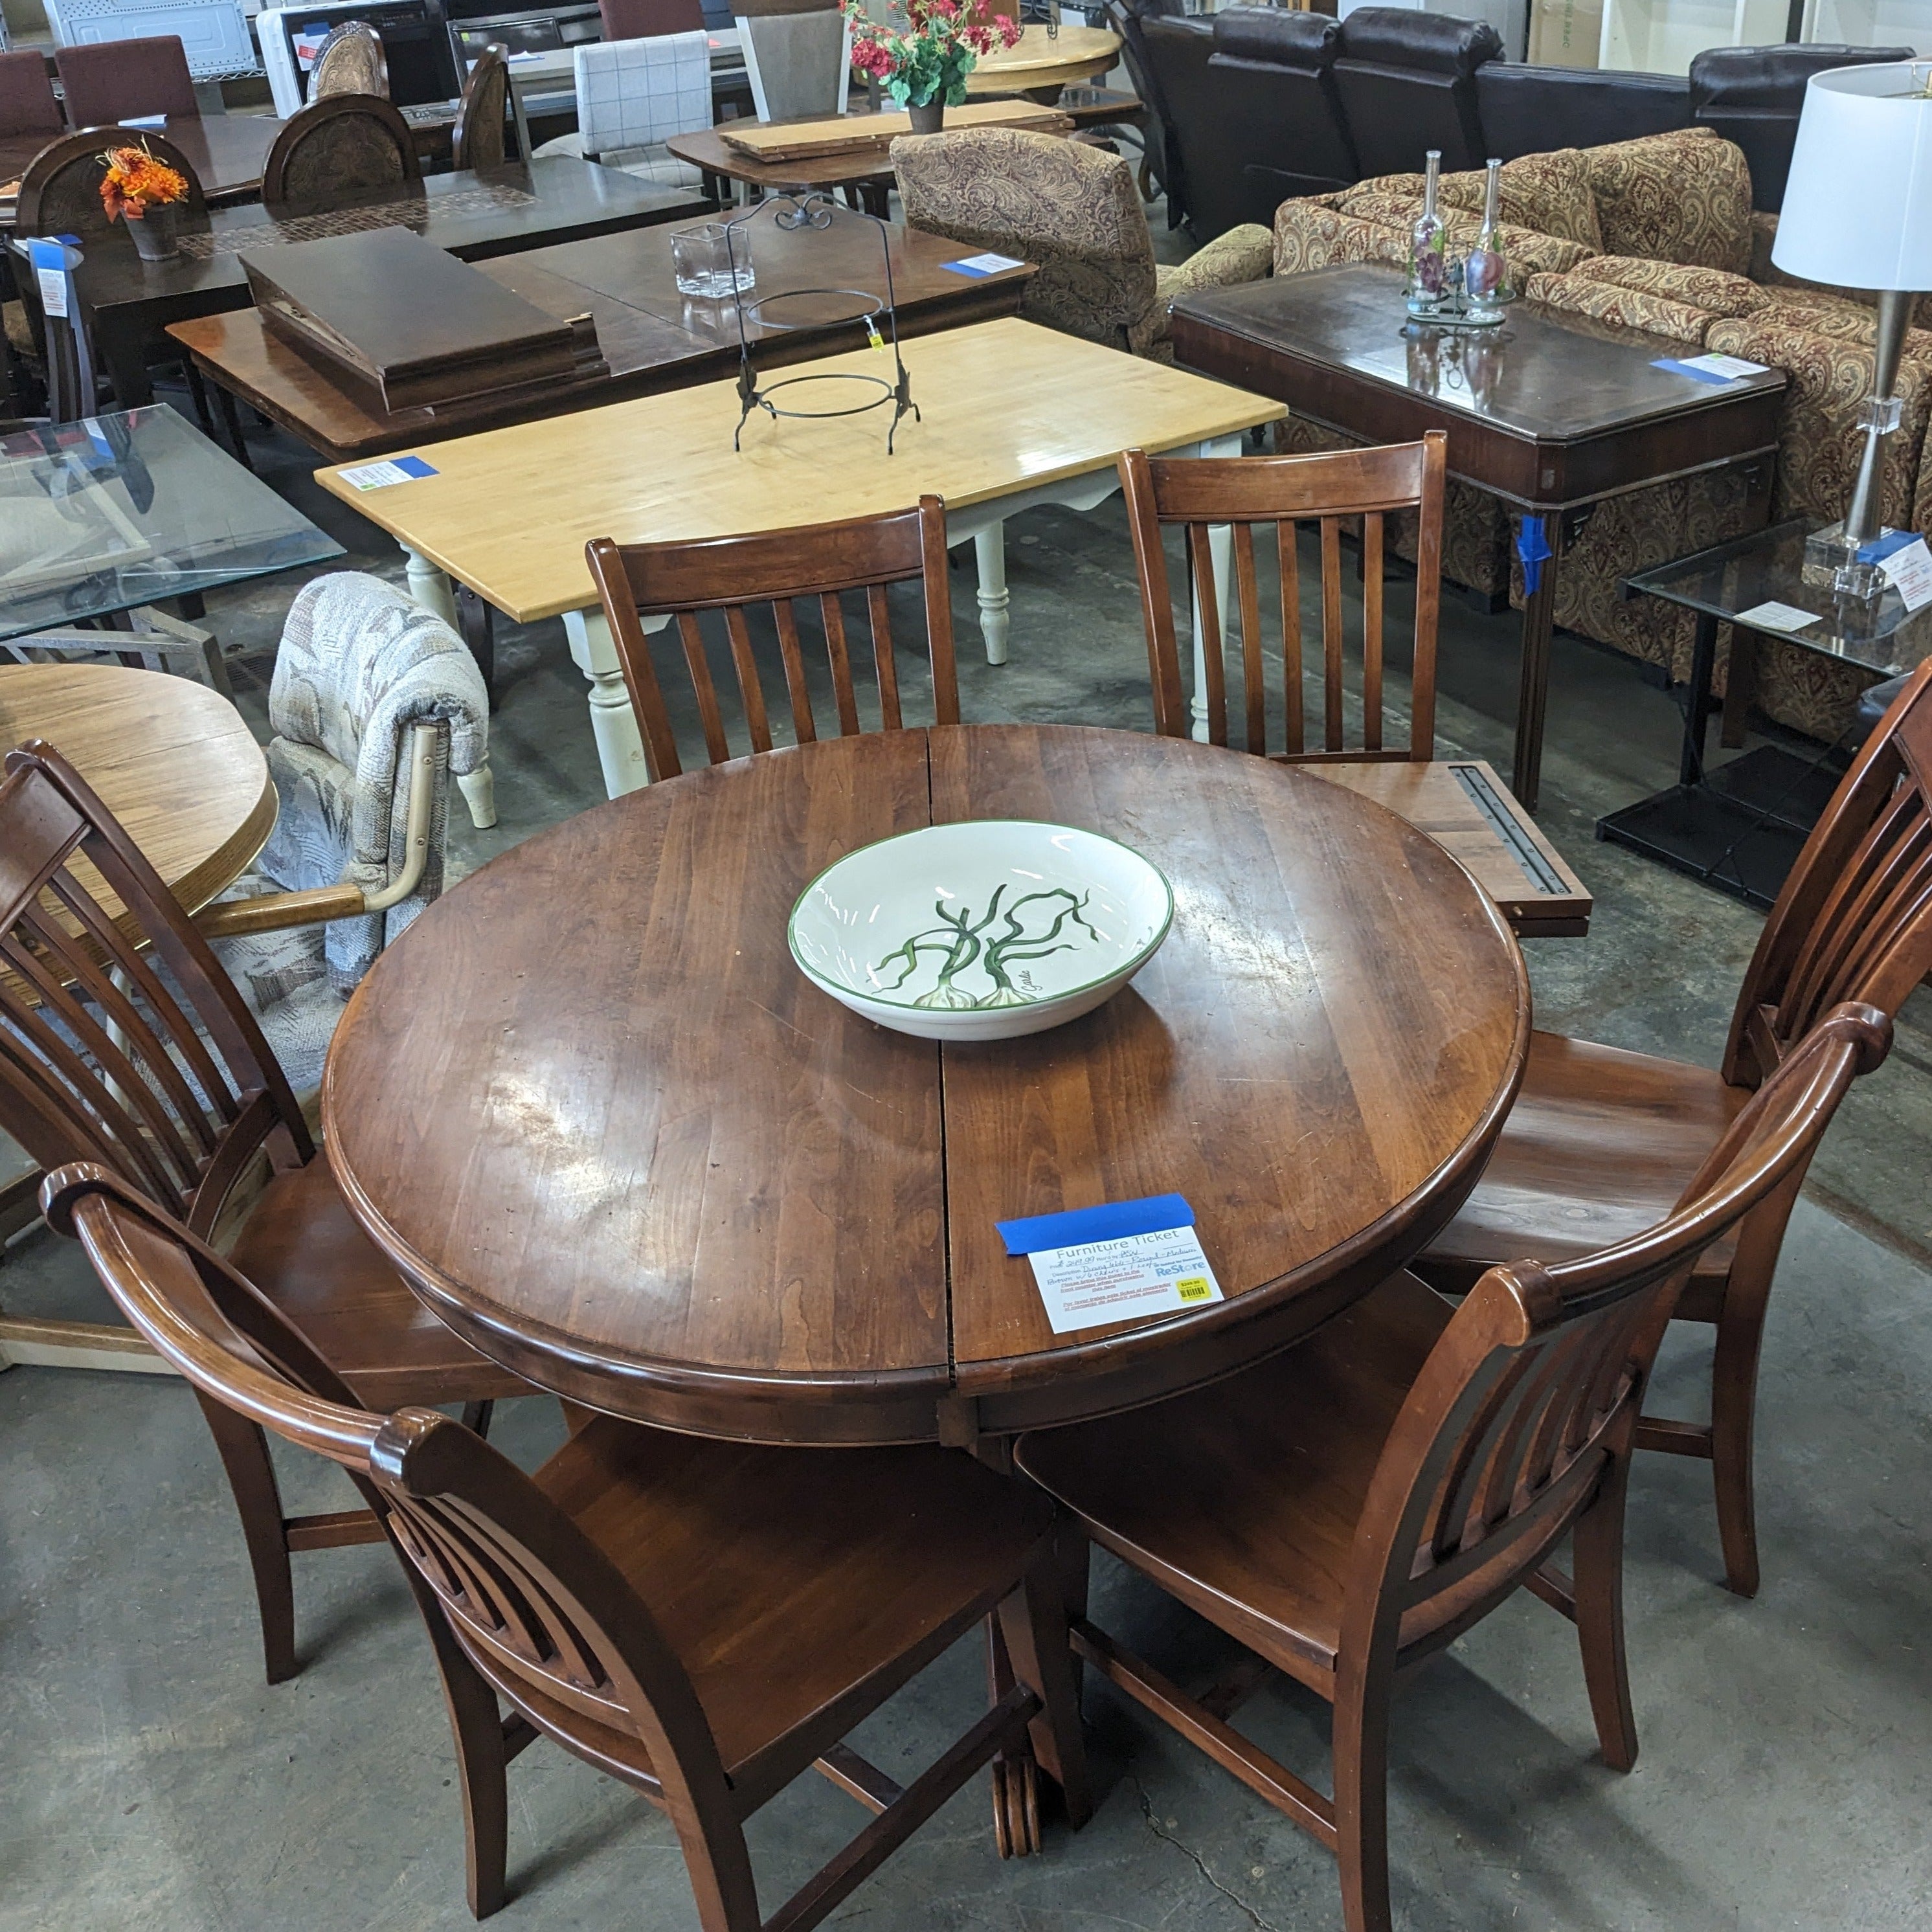 Dining Room Sets, Tables, & Chairs Available In-Store Only